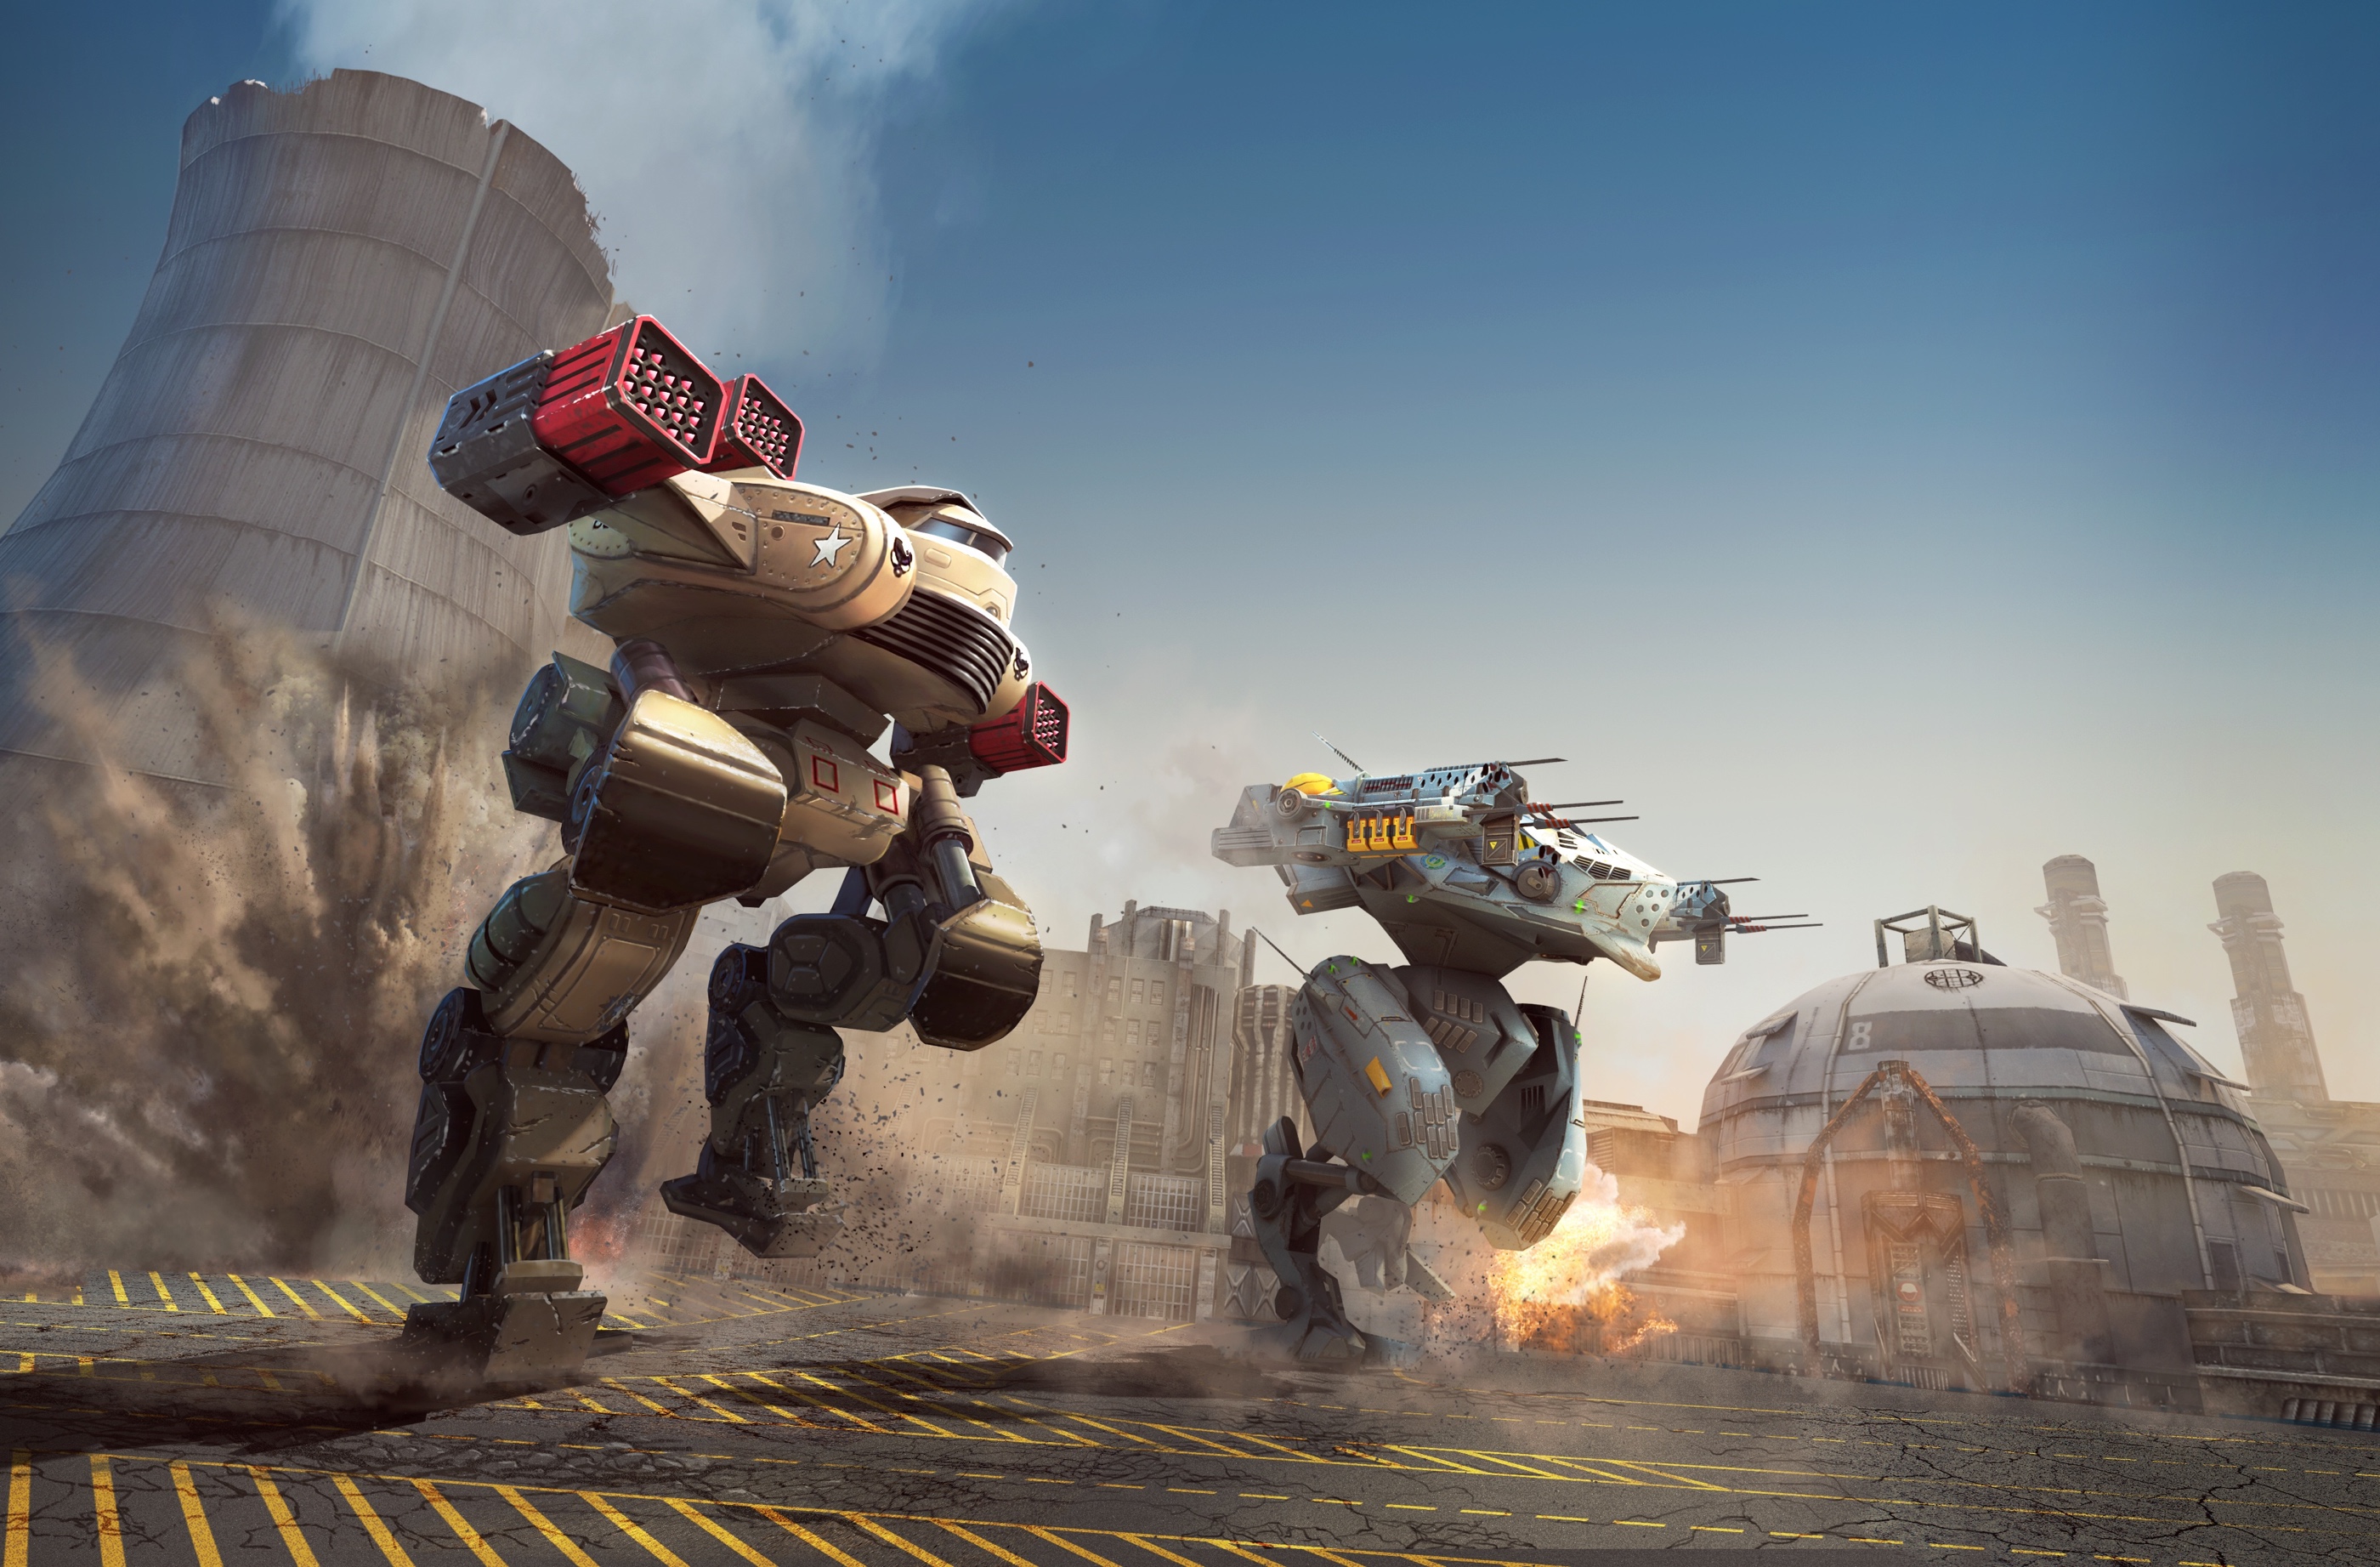 Upgrade your war robots with cheats